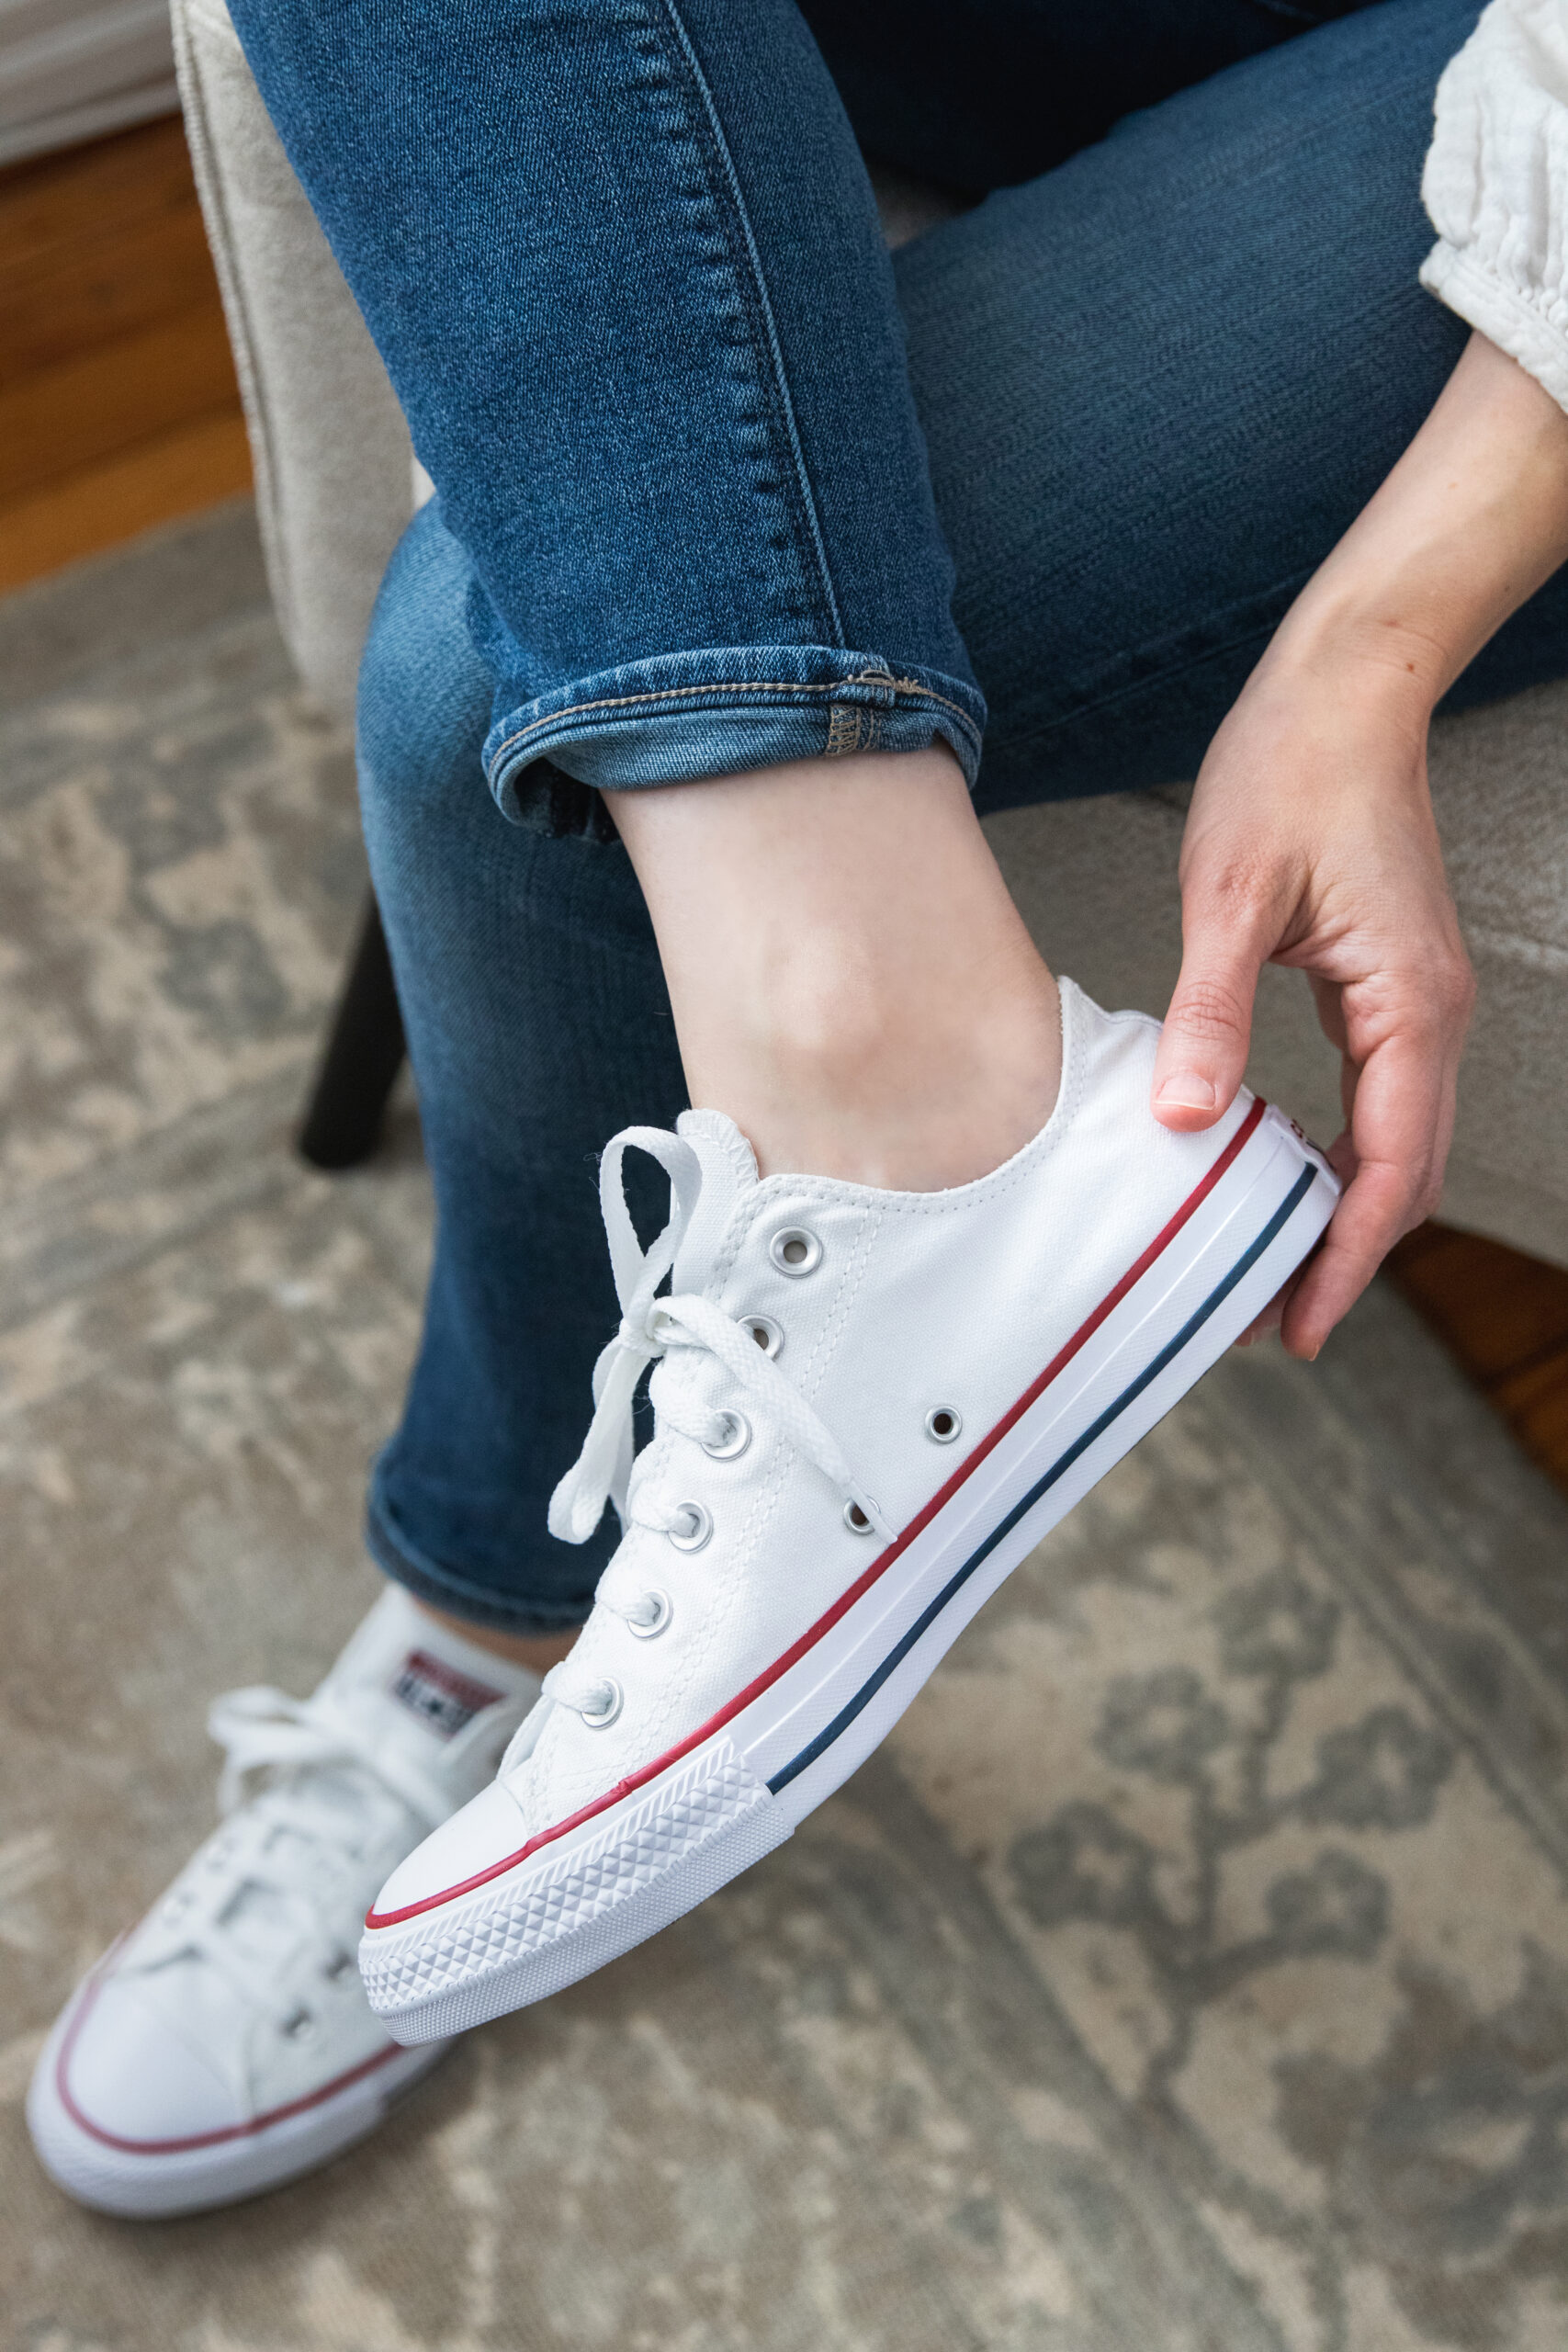 How to clean white converse sneakers in 5 easy steps